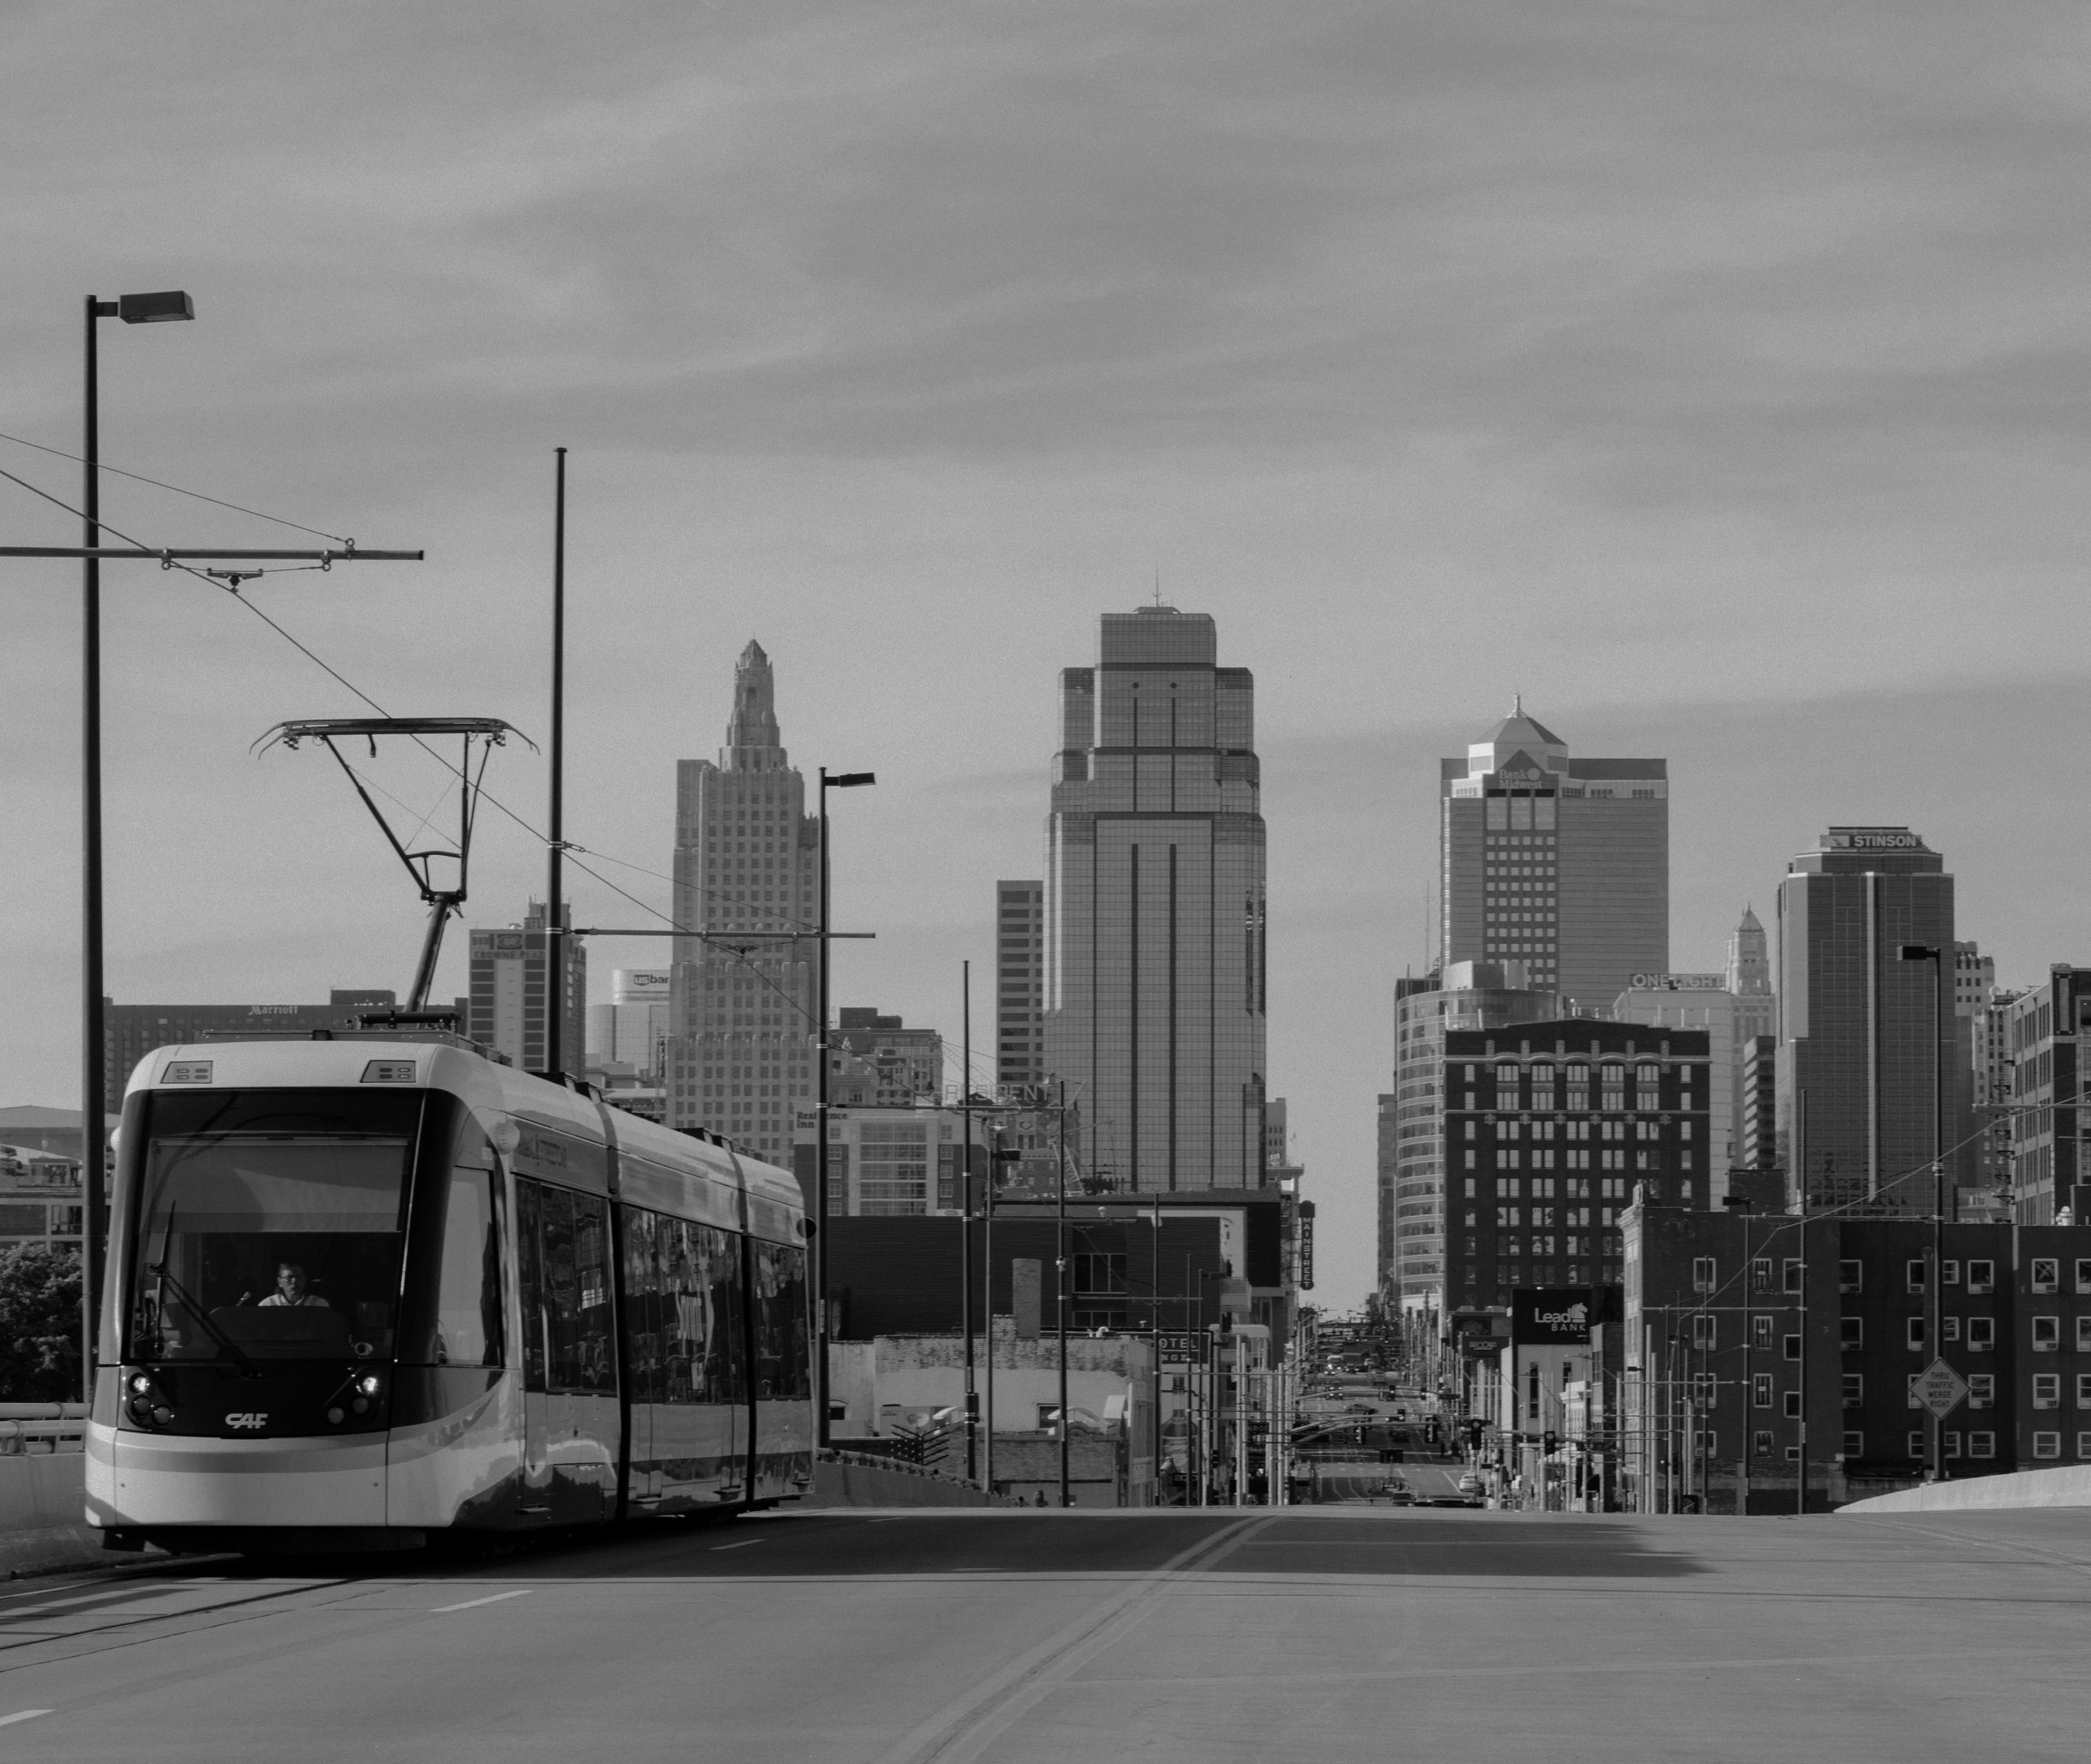 Kansas City, United States - May 6, 2016: The KC Streetcar provides free public transportation across two miles in the center of downtown and connects to other methods of mass transit with the goals of building up the community while increasing property values and making travel more efficient.